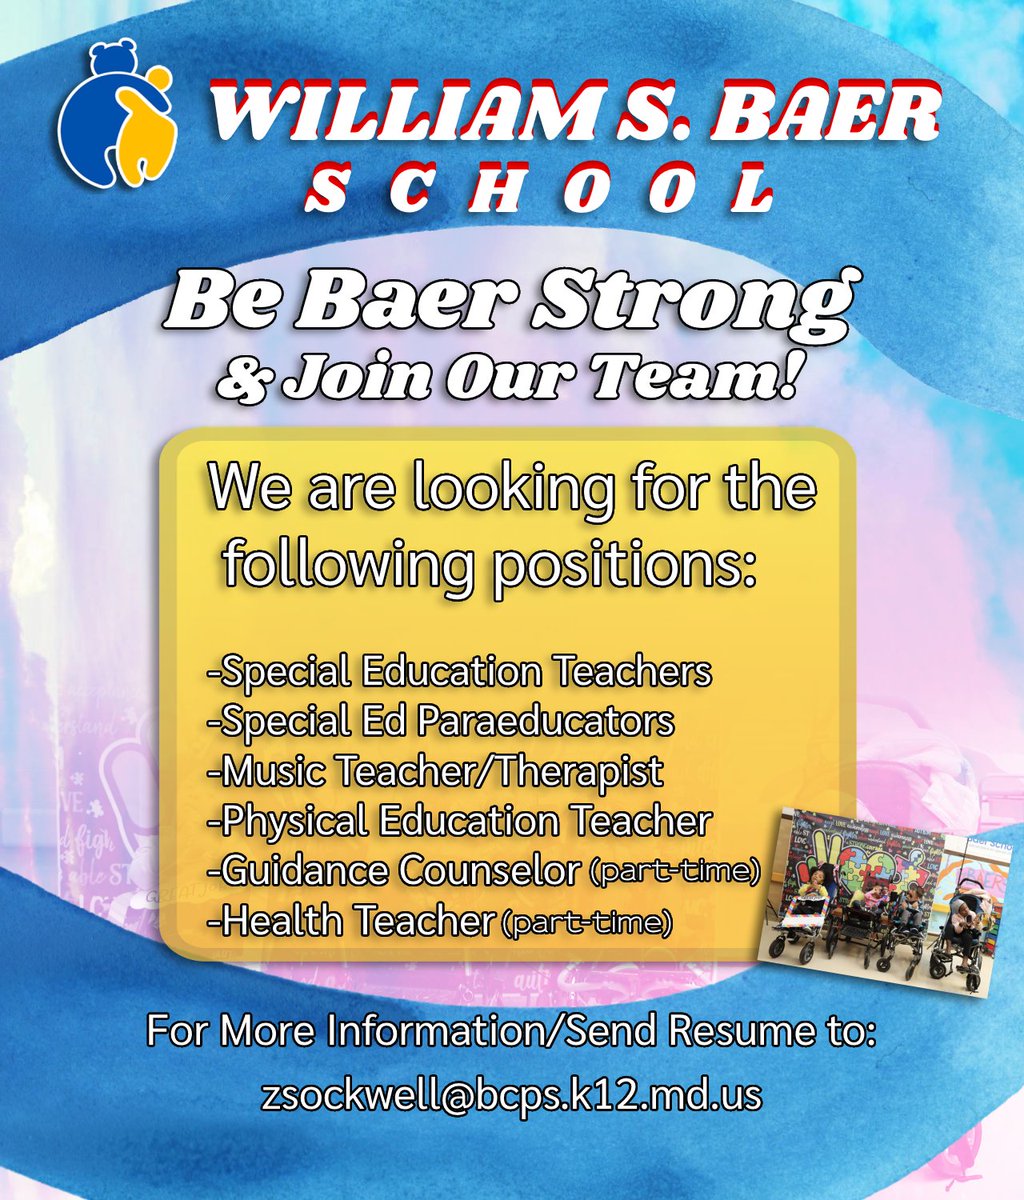 W.S. Baer School is hiring! For more info see our flyer! #BaerStrong #BCPSS @BaltCitySchools